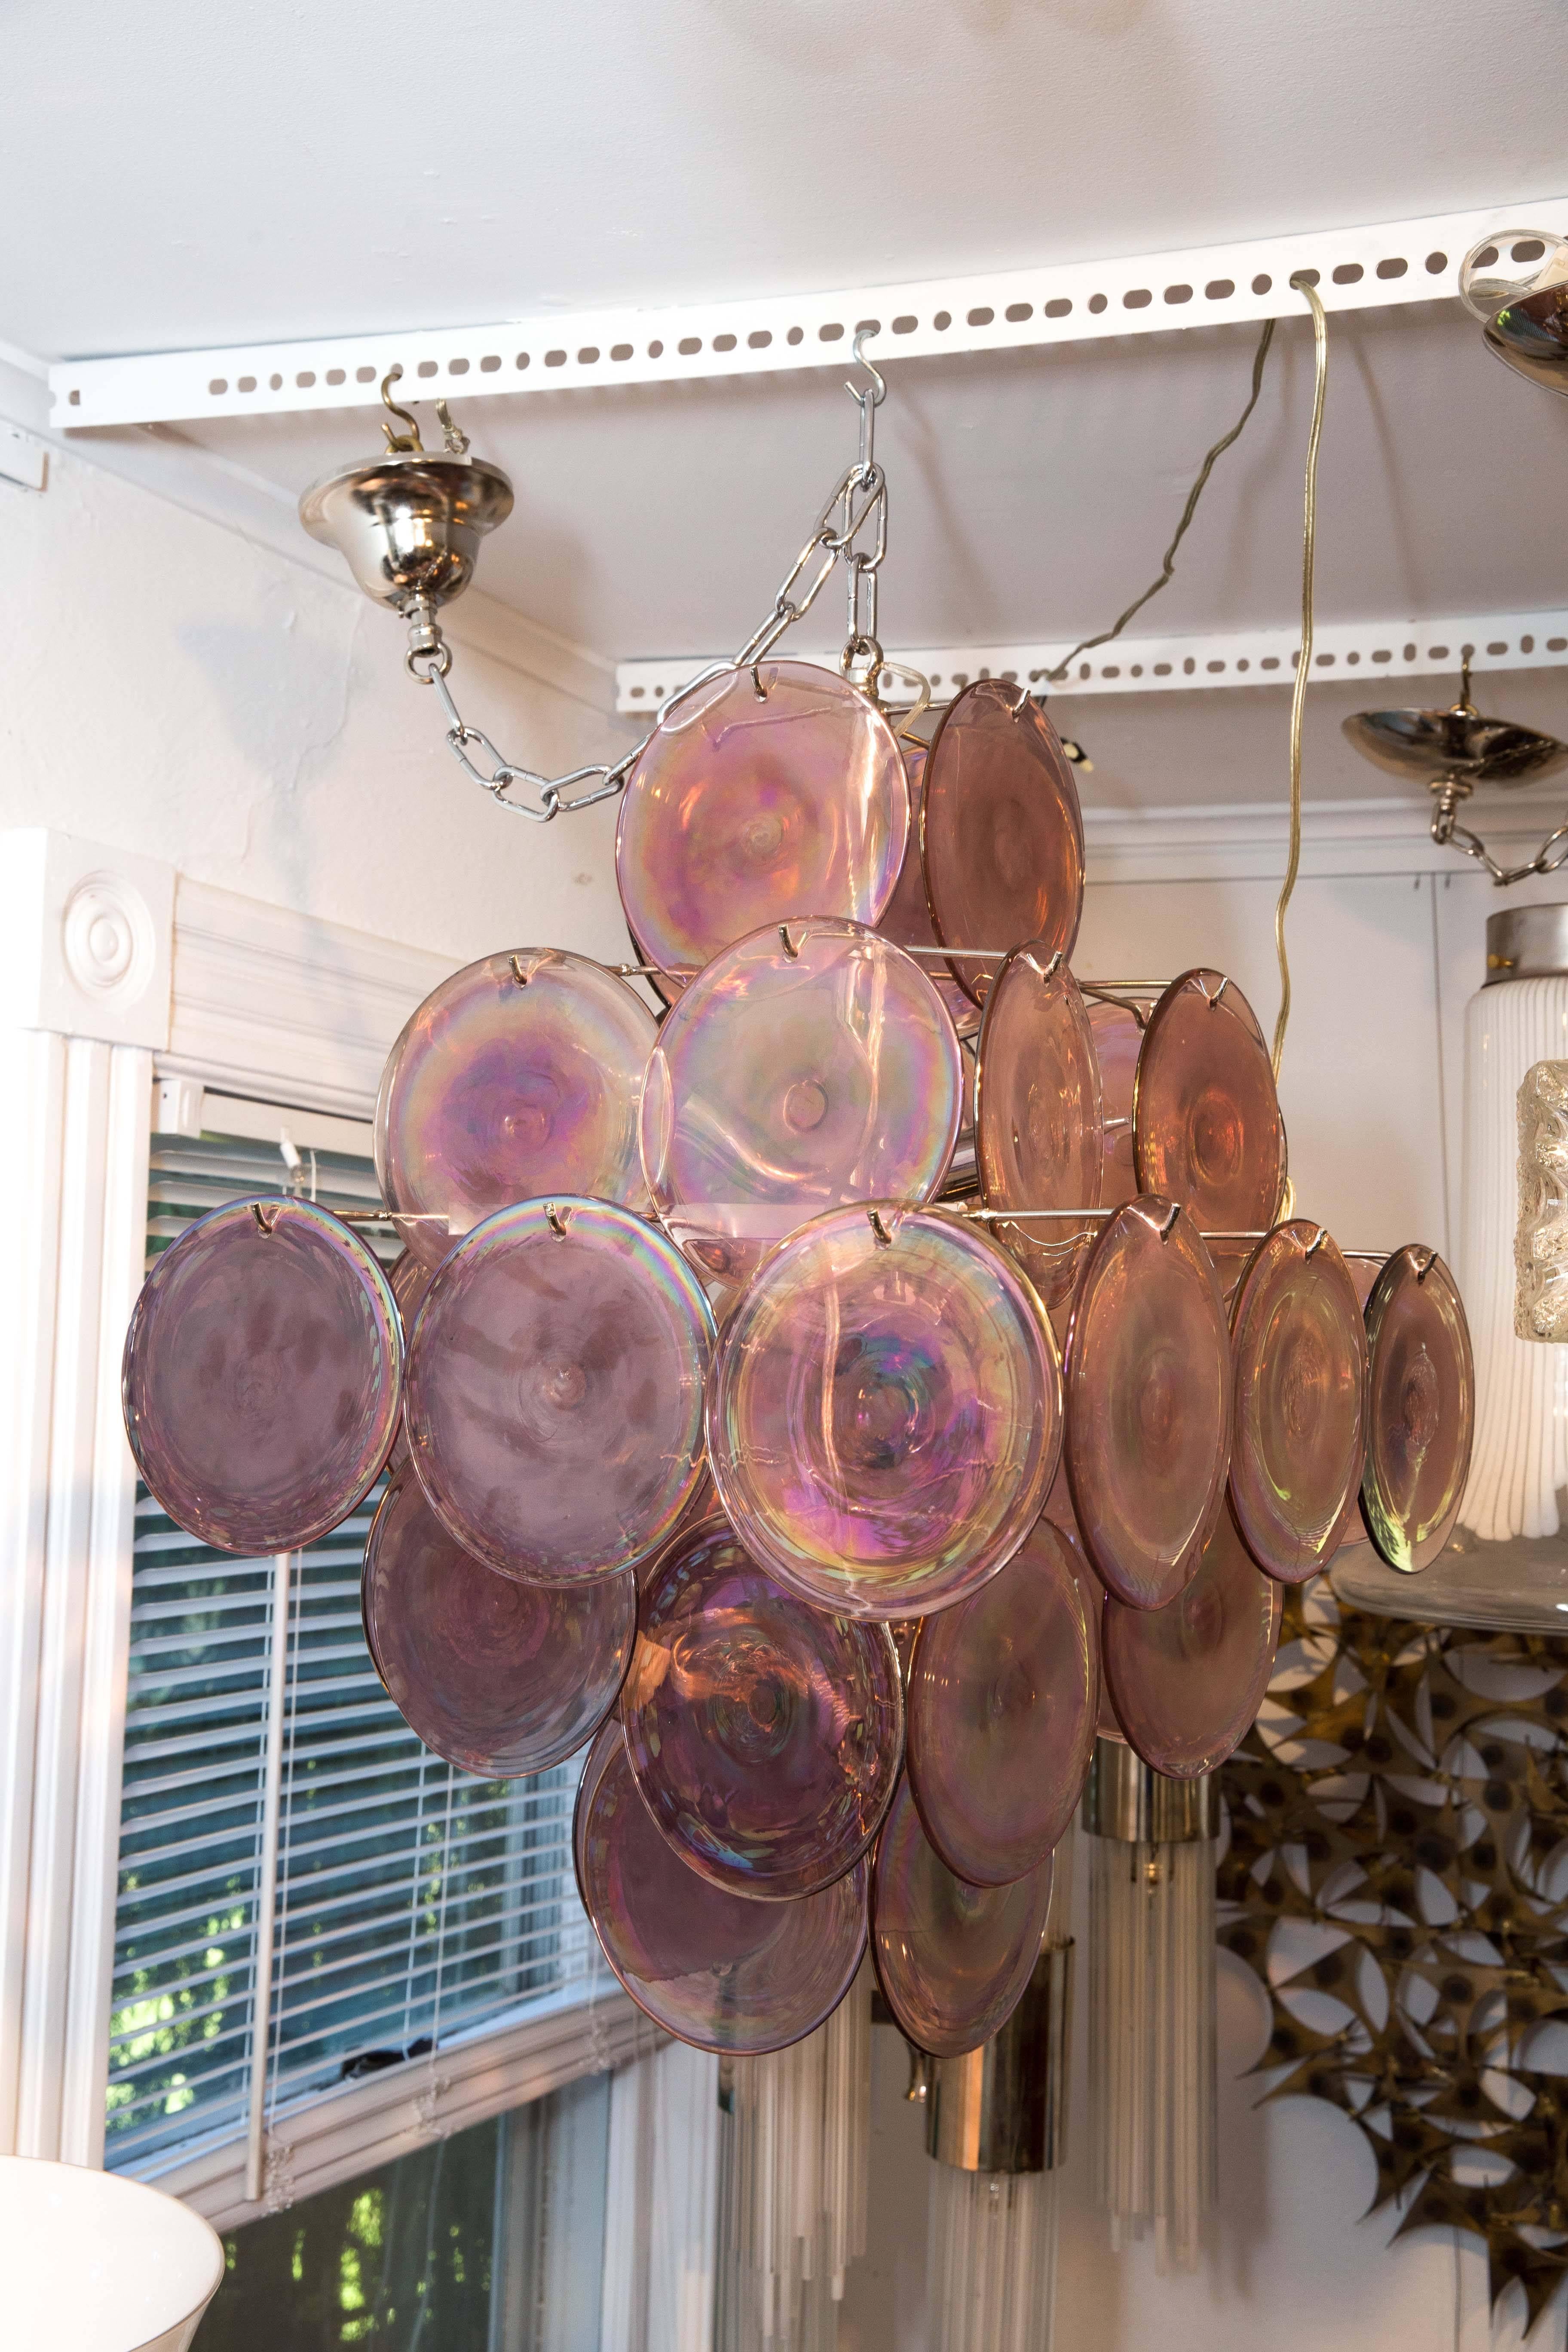 Italian Nickel Chandelier Composed of 36 Layered Purple Glass Disks by Vistosi